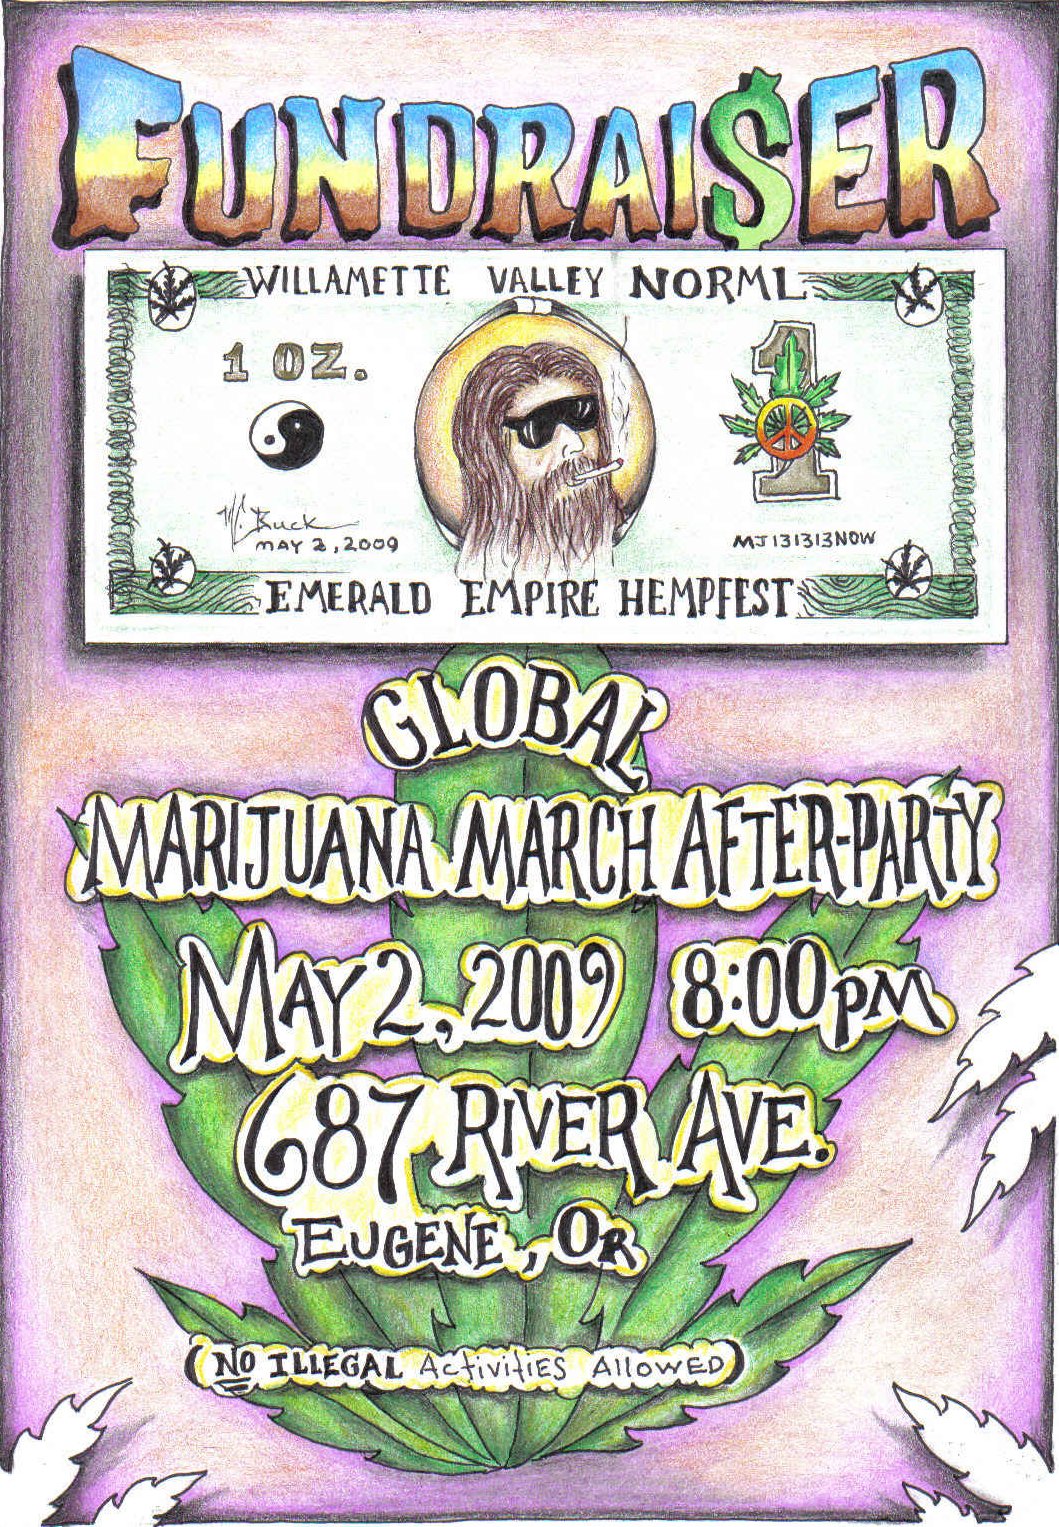 Global Marijuana March After party and Fundraiser